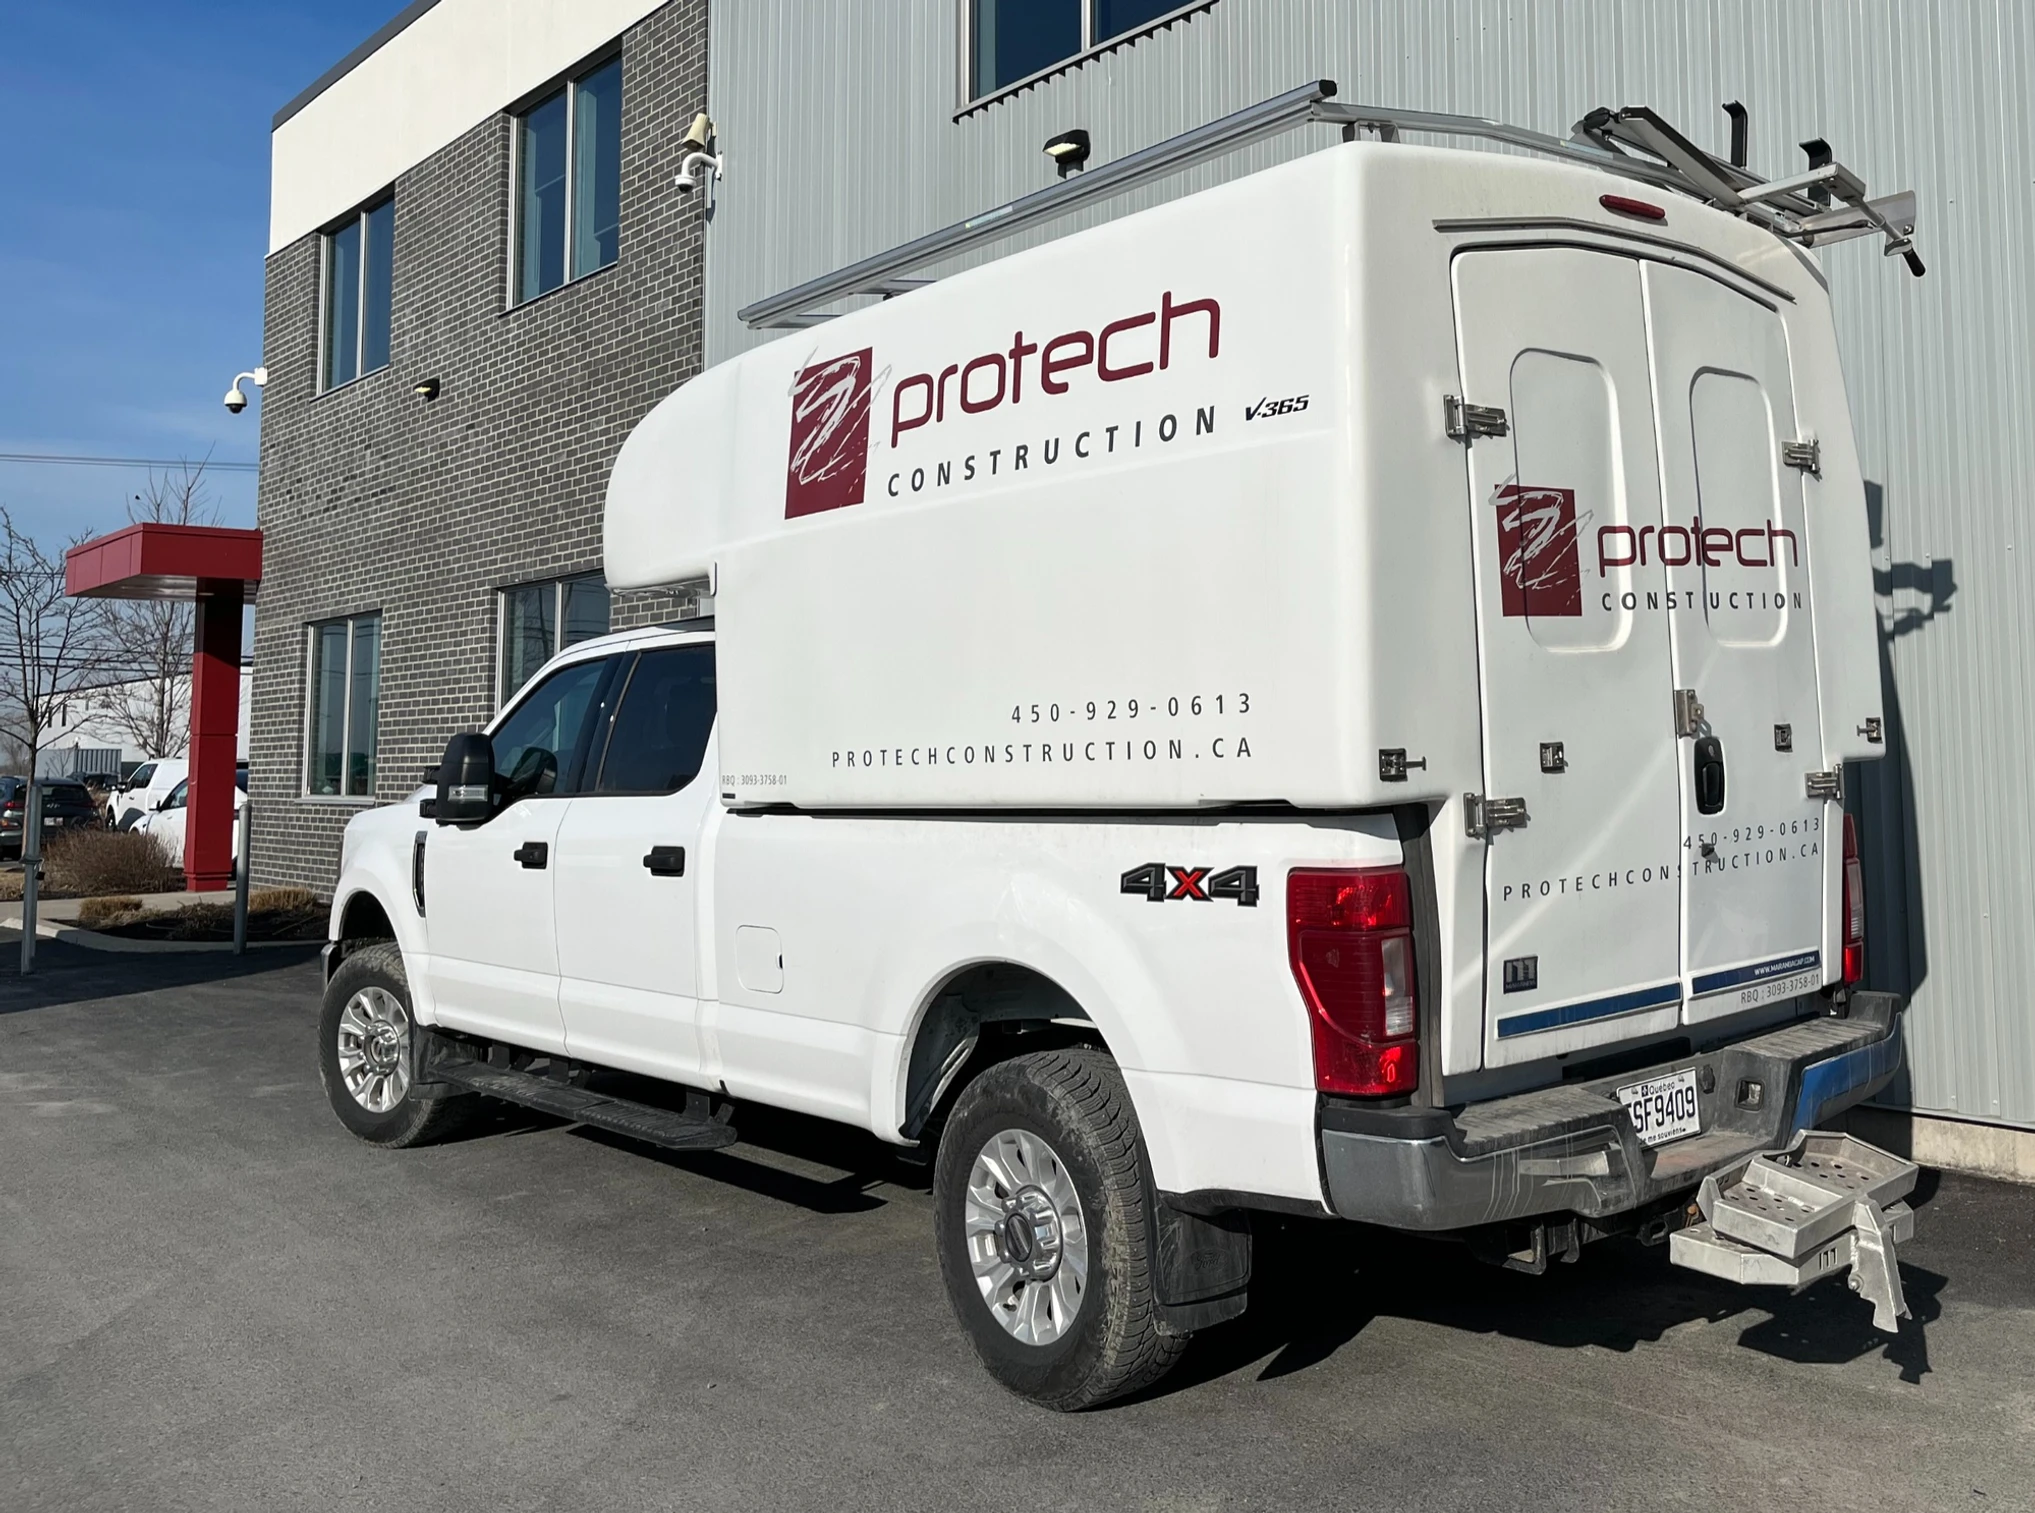 Protech Construction truck at interior design project site.